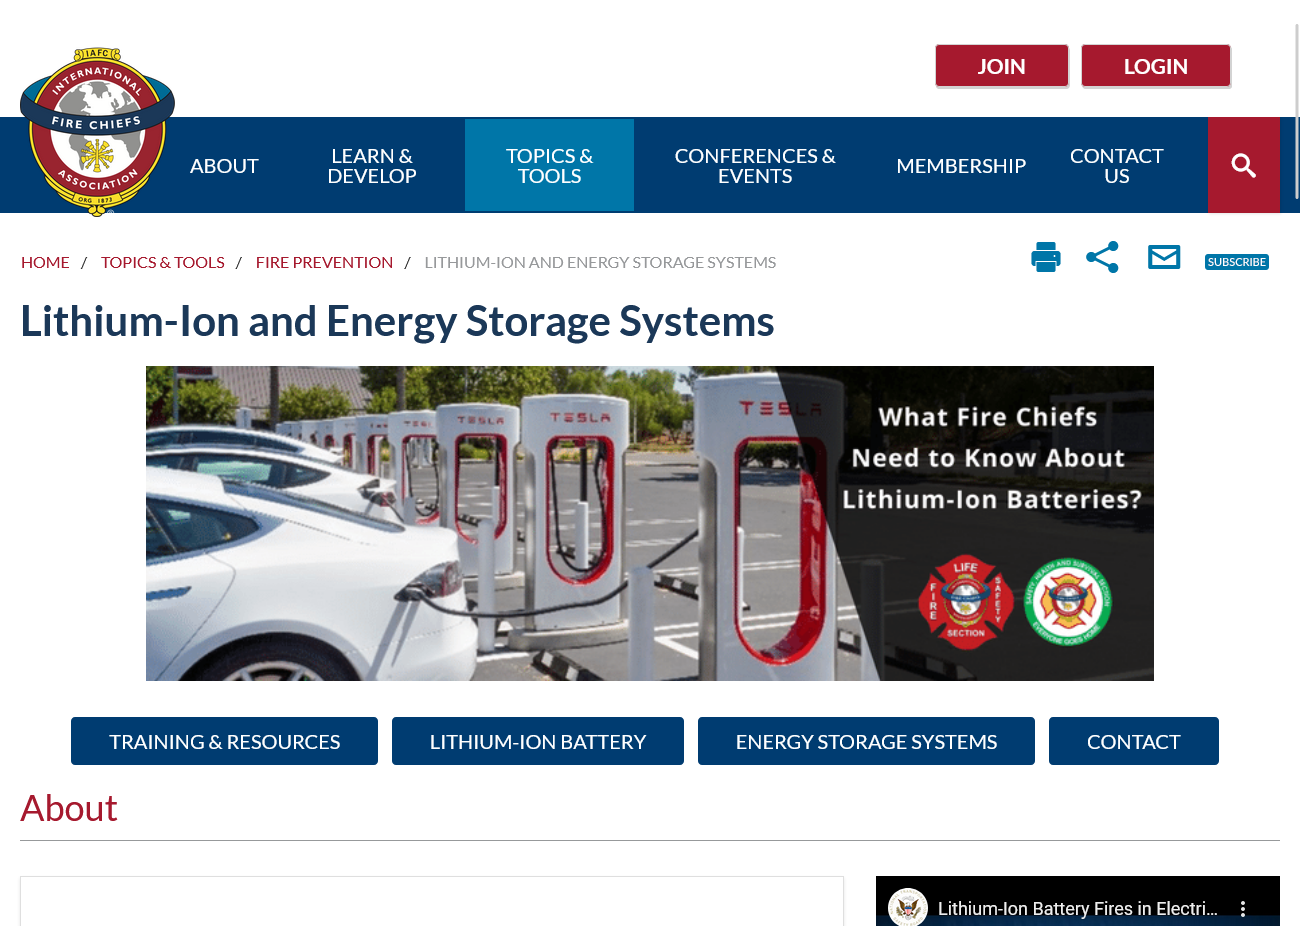 Lithium-Ion and Energy Storage Systems page